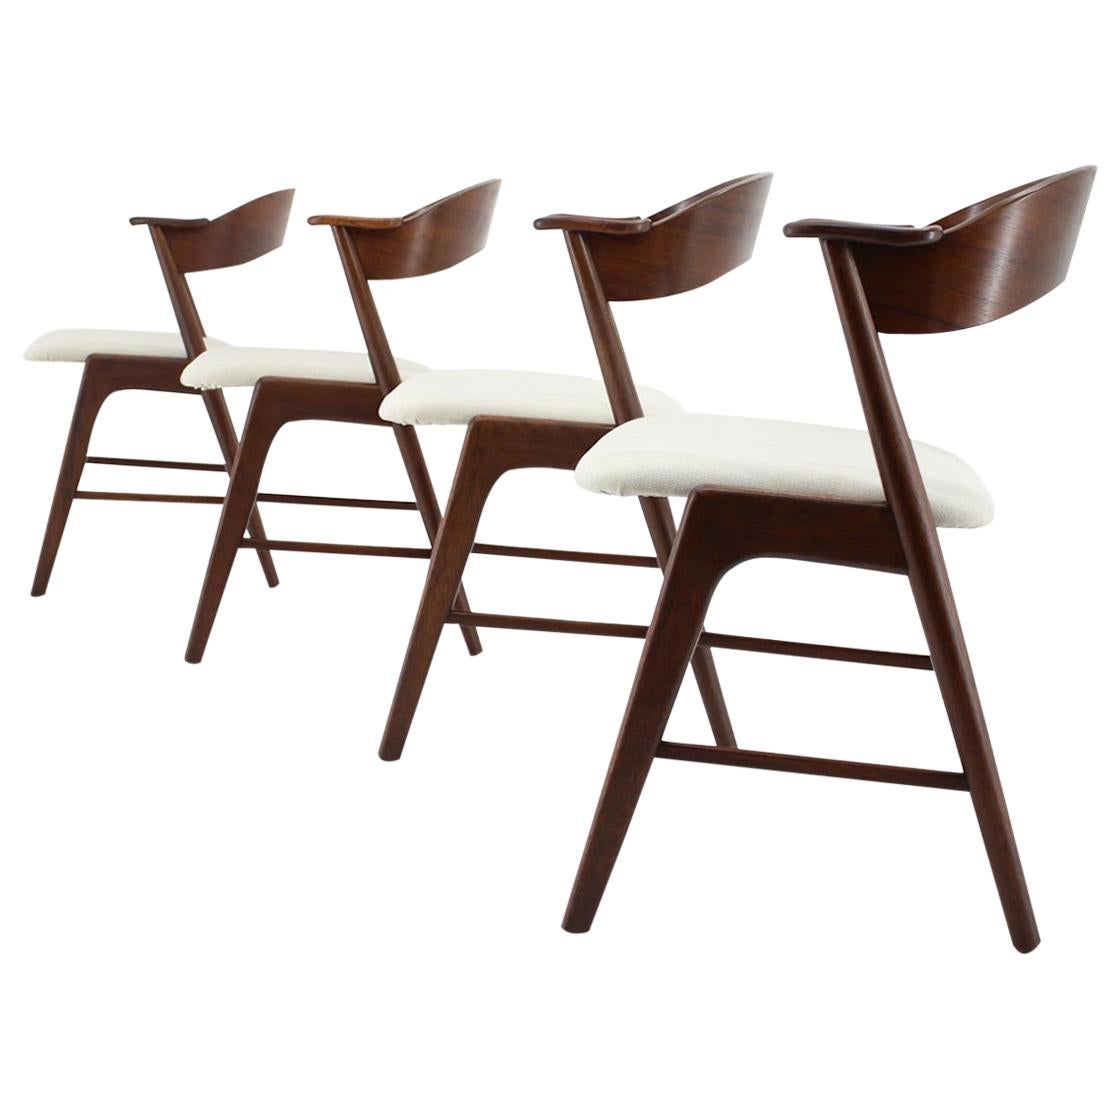 1960s Set of 4 Palisander Dining Chairs, Denmark